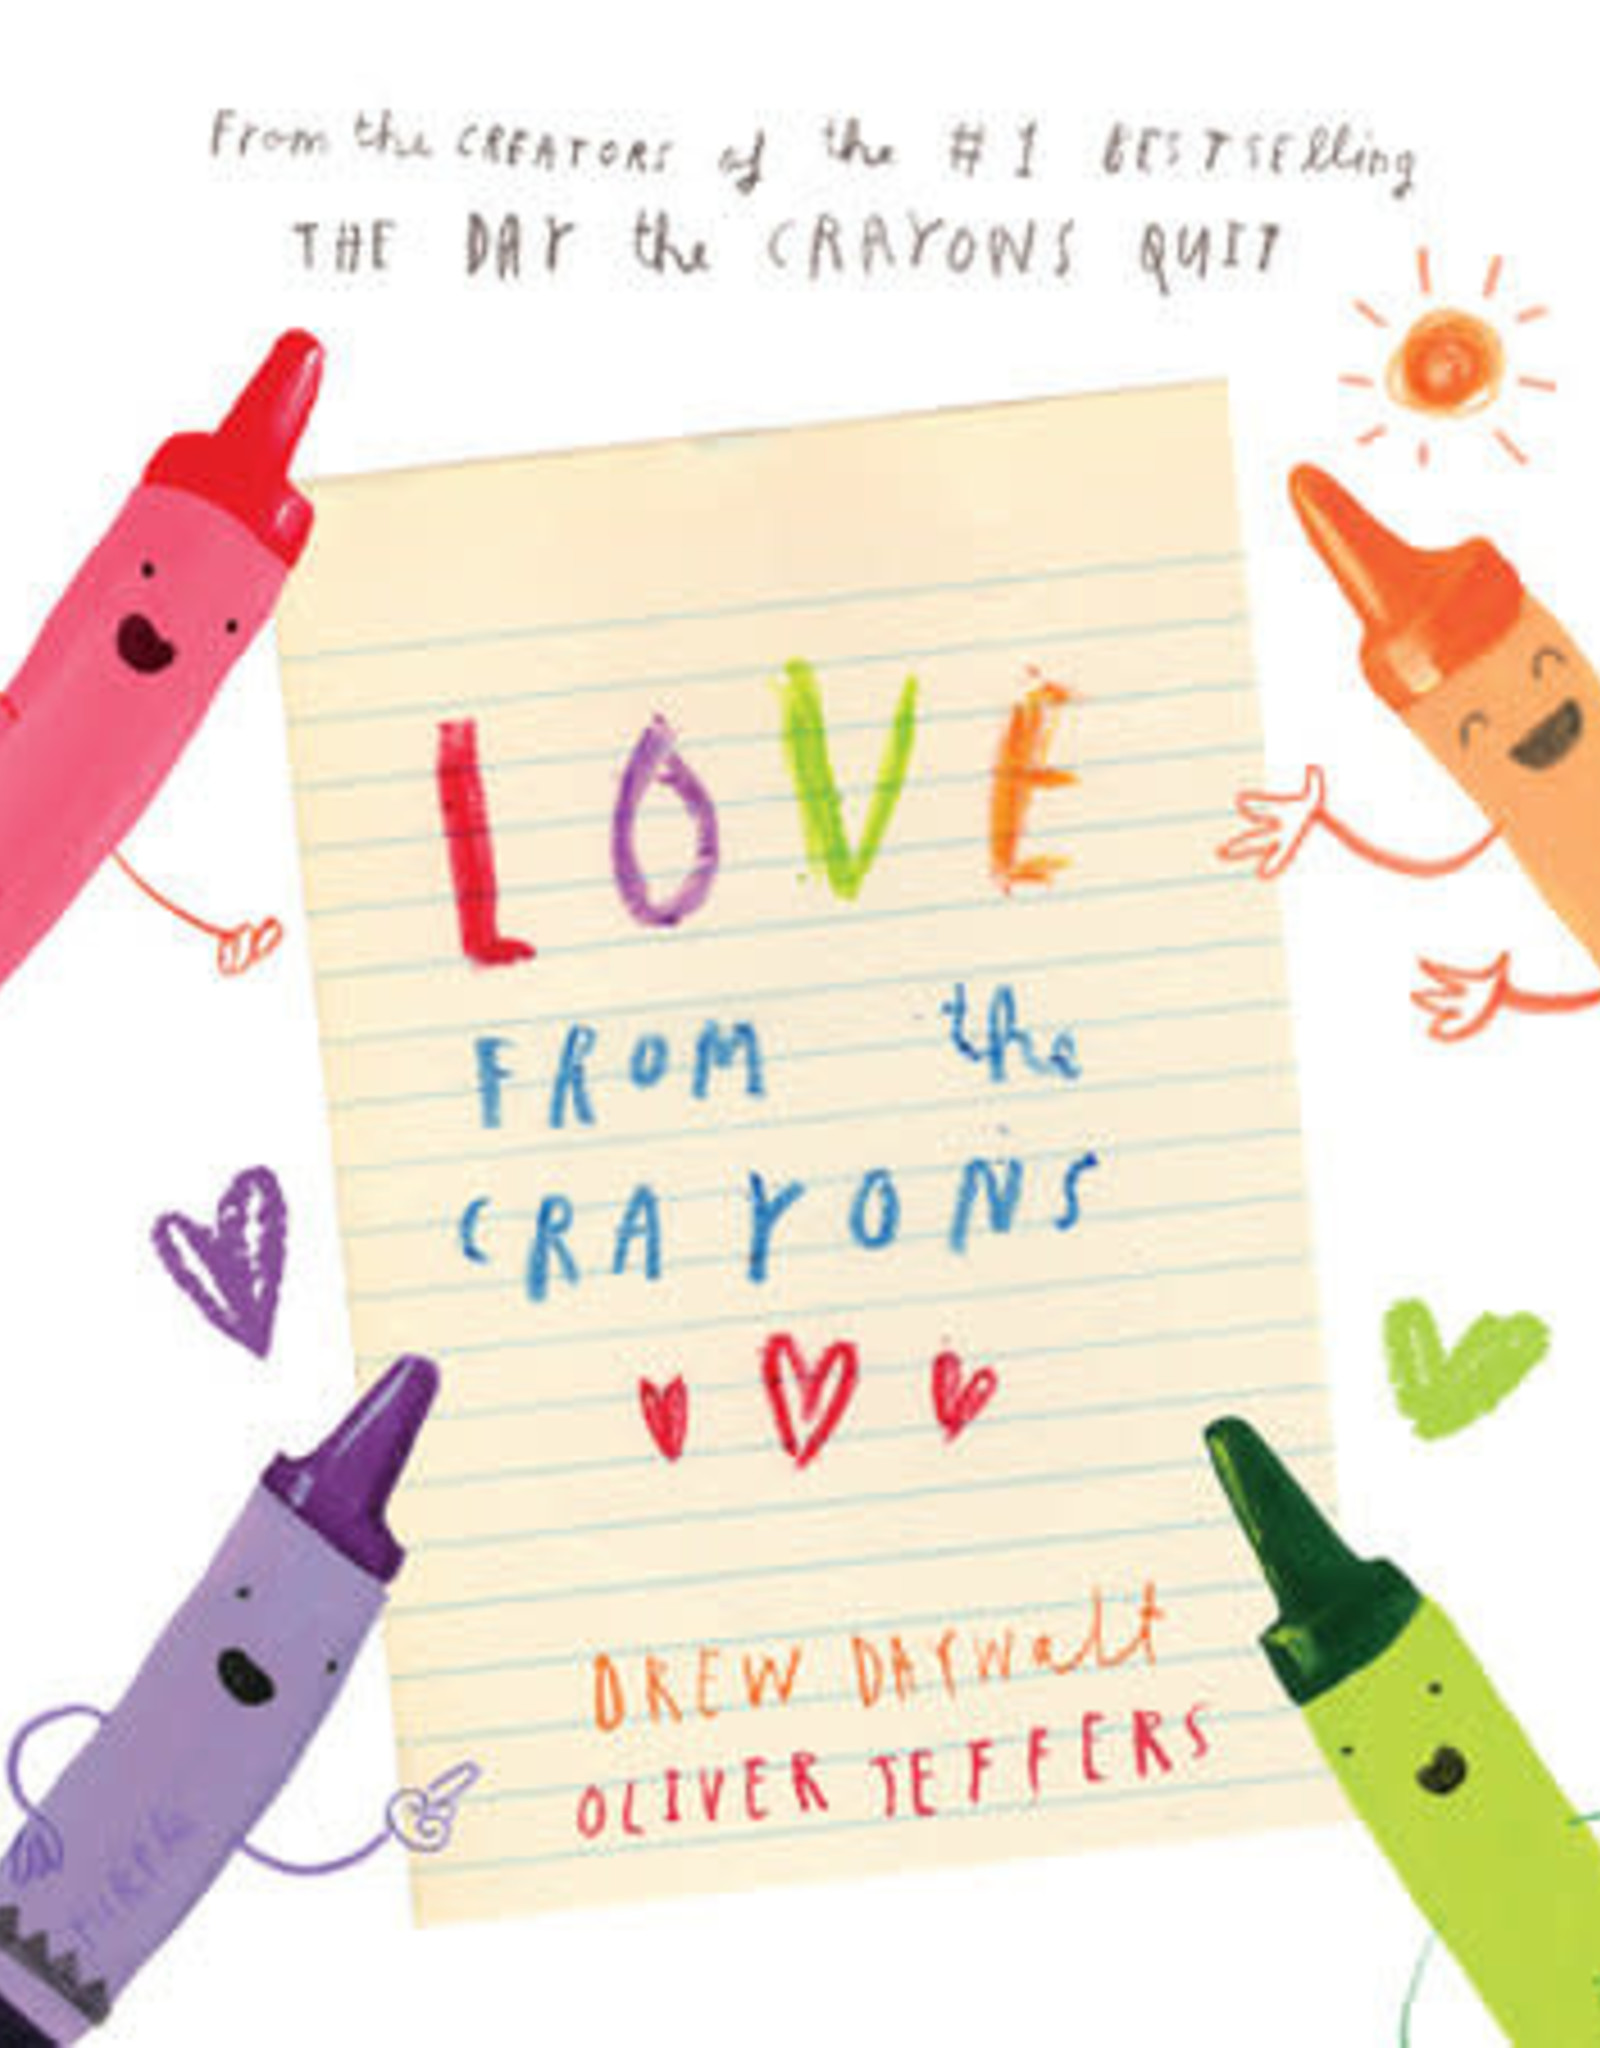 Love From the Crayons